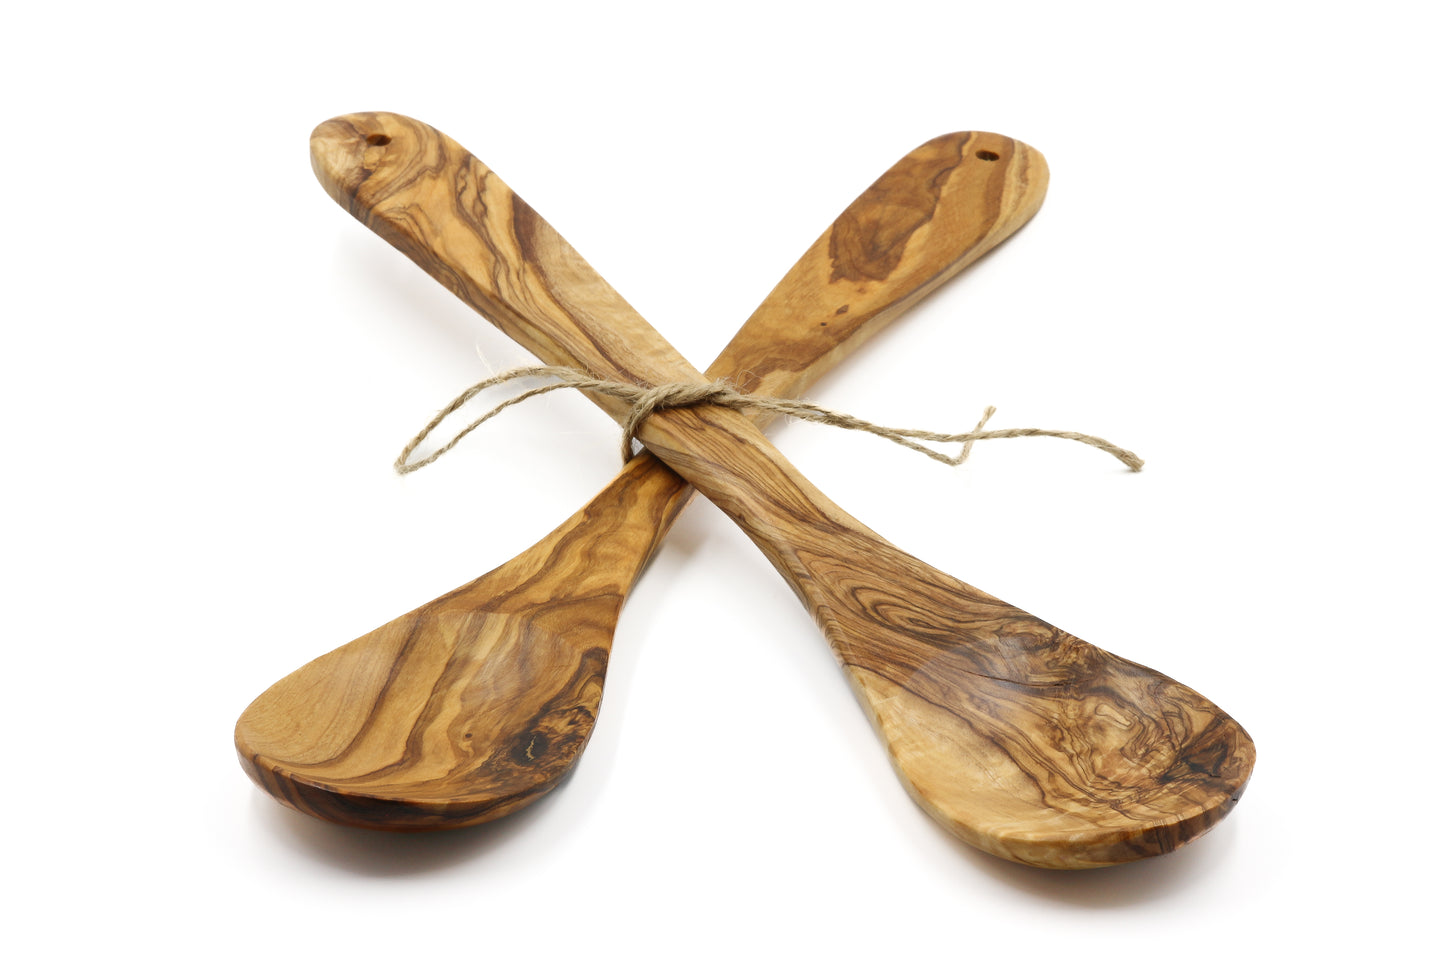 Enhance your cooking experience with this olive wood spoon